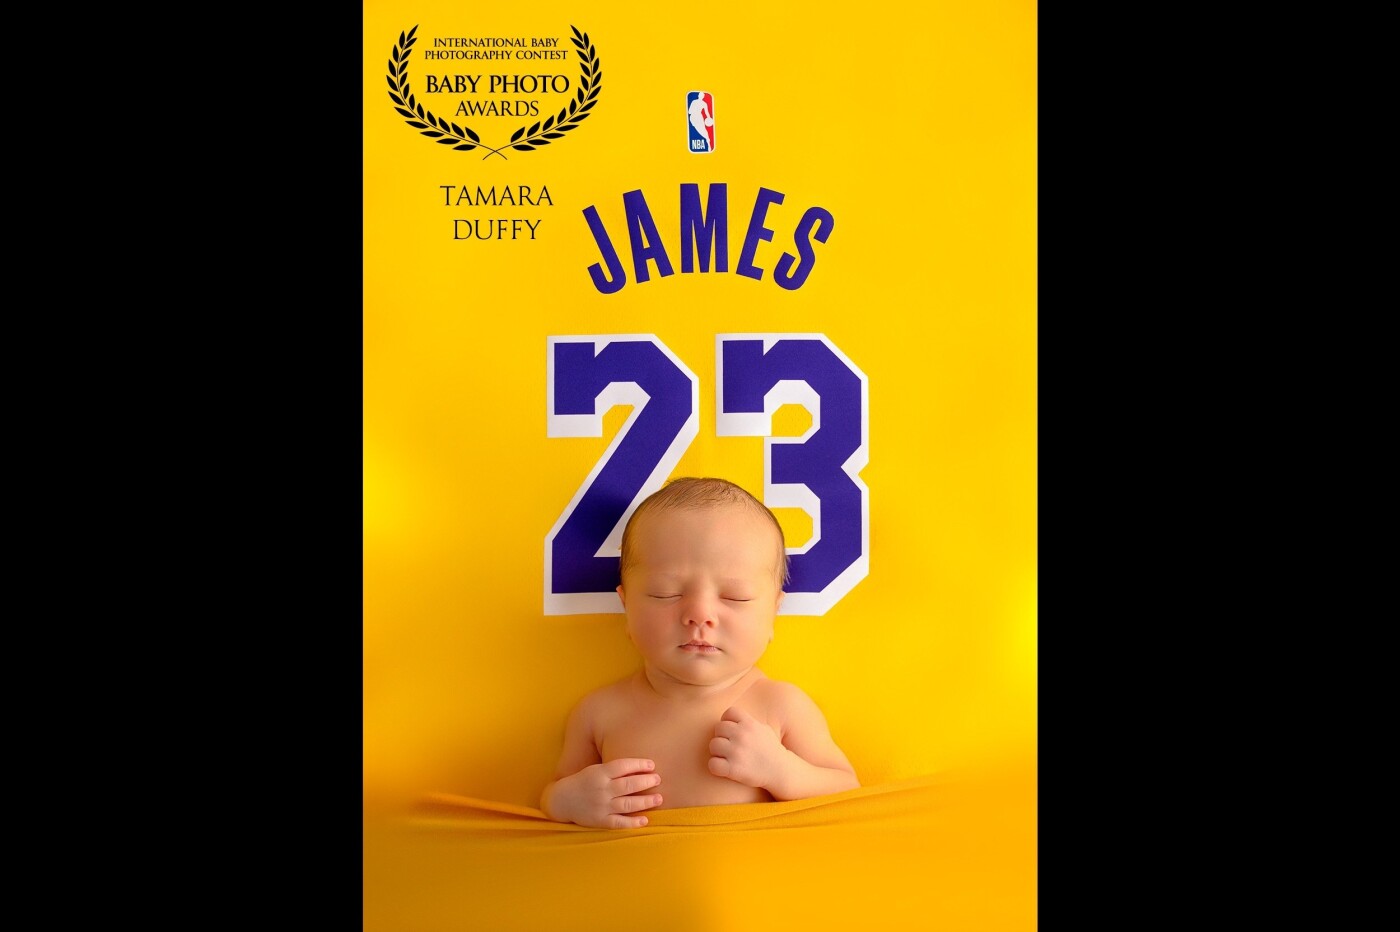 There was a great deal of effort that went into creating this image. The Dad was hoping I would somehow incorporate his Lakers jersey for his son’s session.  The look on his face when he saw the portrait was priceless. My eyes are still sore from staring at so much yellow! 